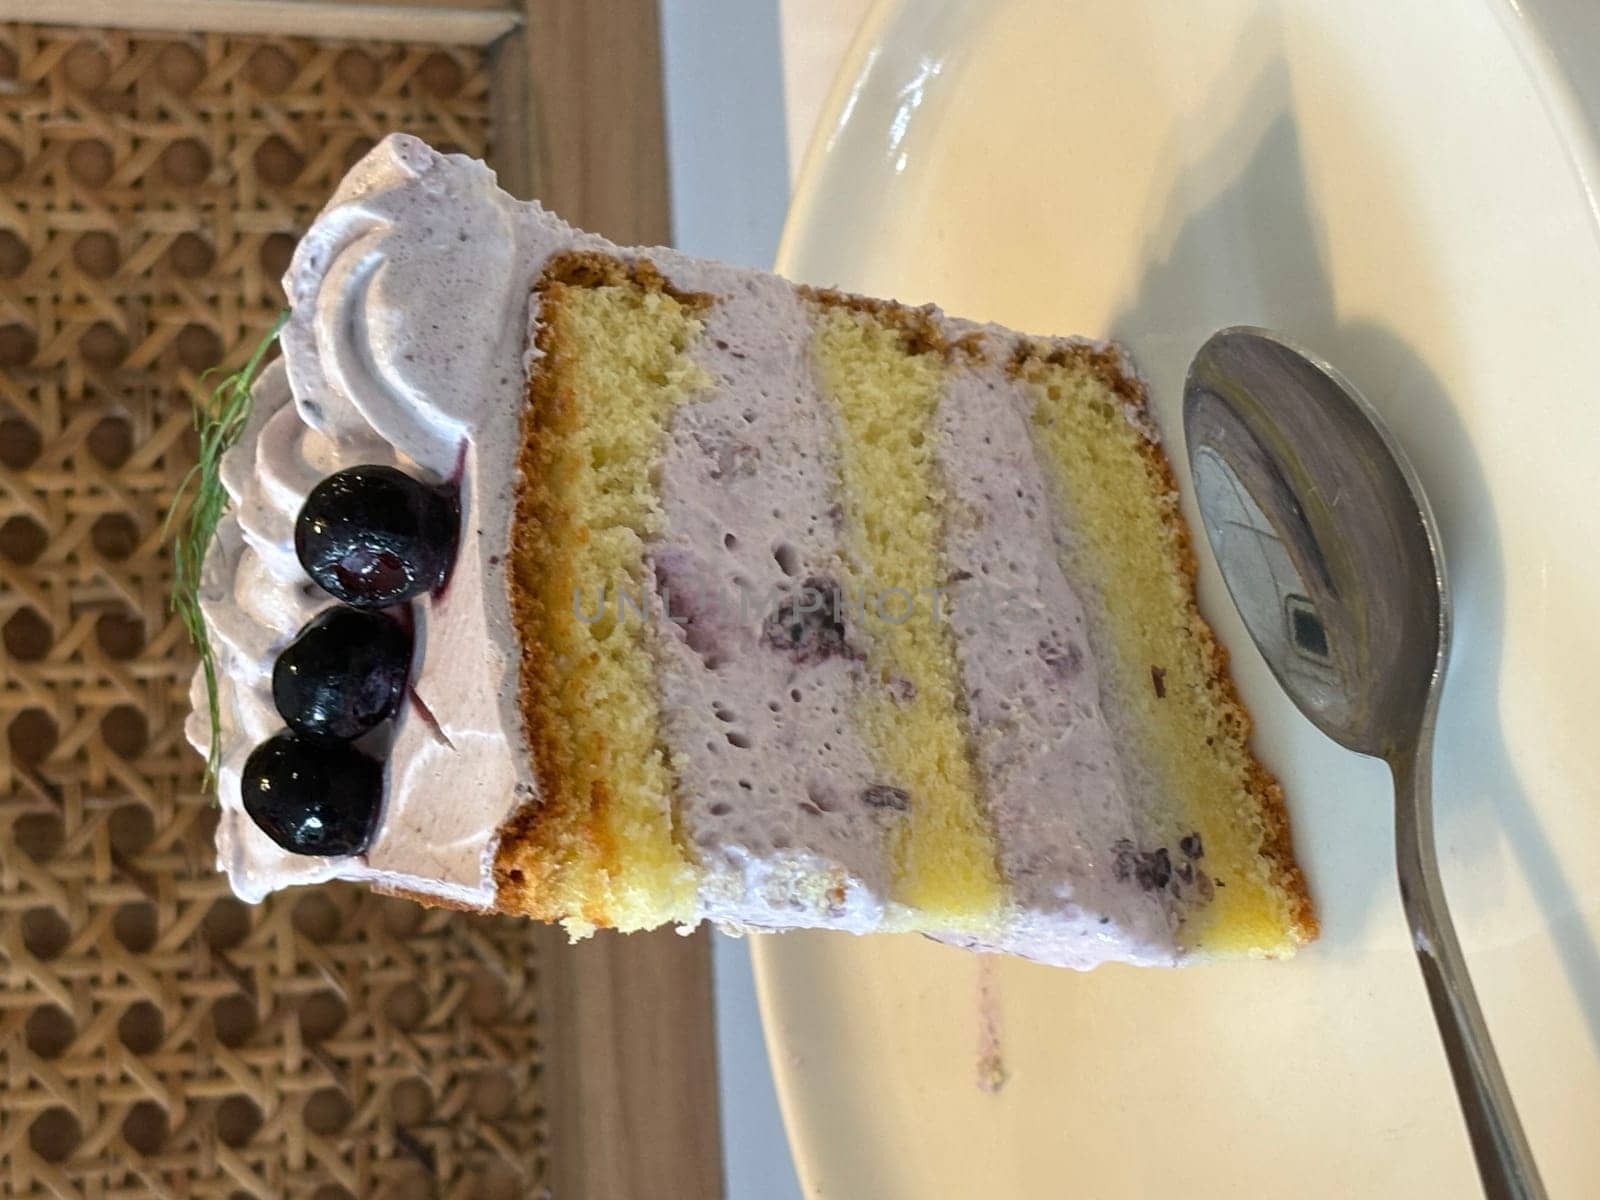 slice of blueberry cake decorated with fresh berries on white plate, delicious layered cake, top view by antoksena